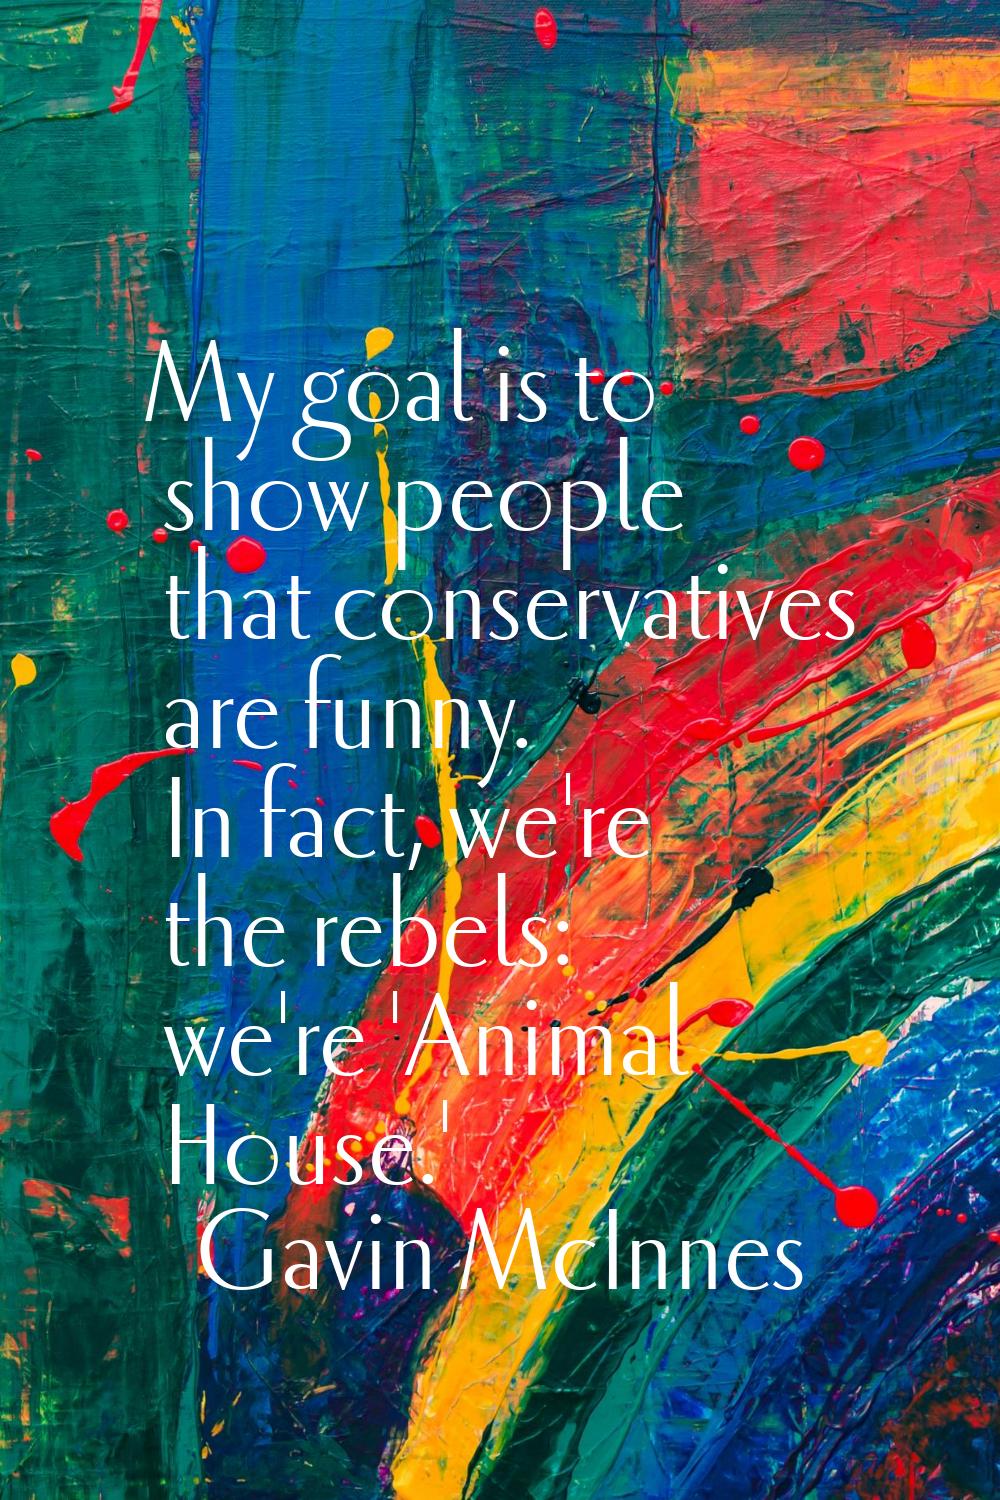 My goal is to show people that conservatives are funny. In fact, we're the rebels: we're 'Animal Ho